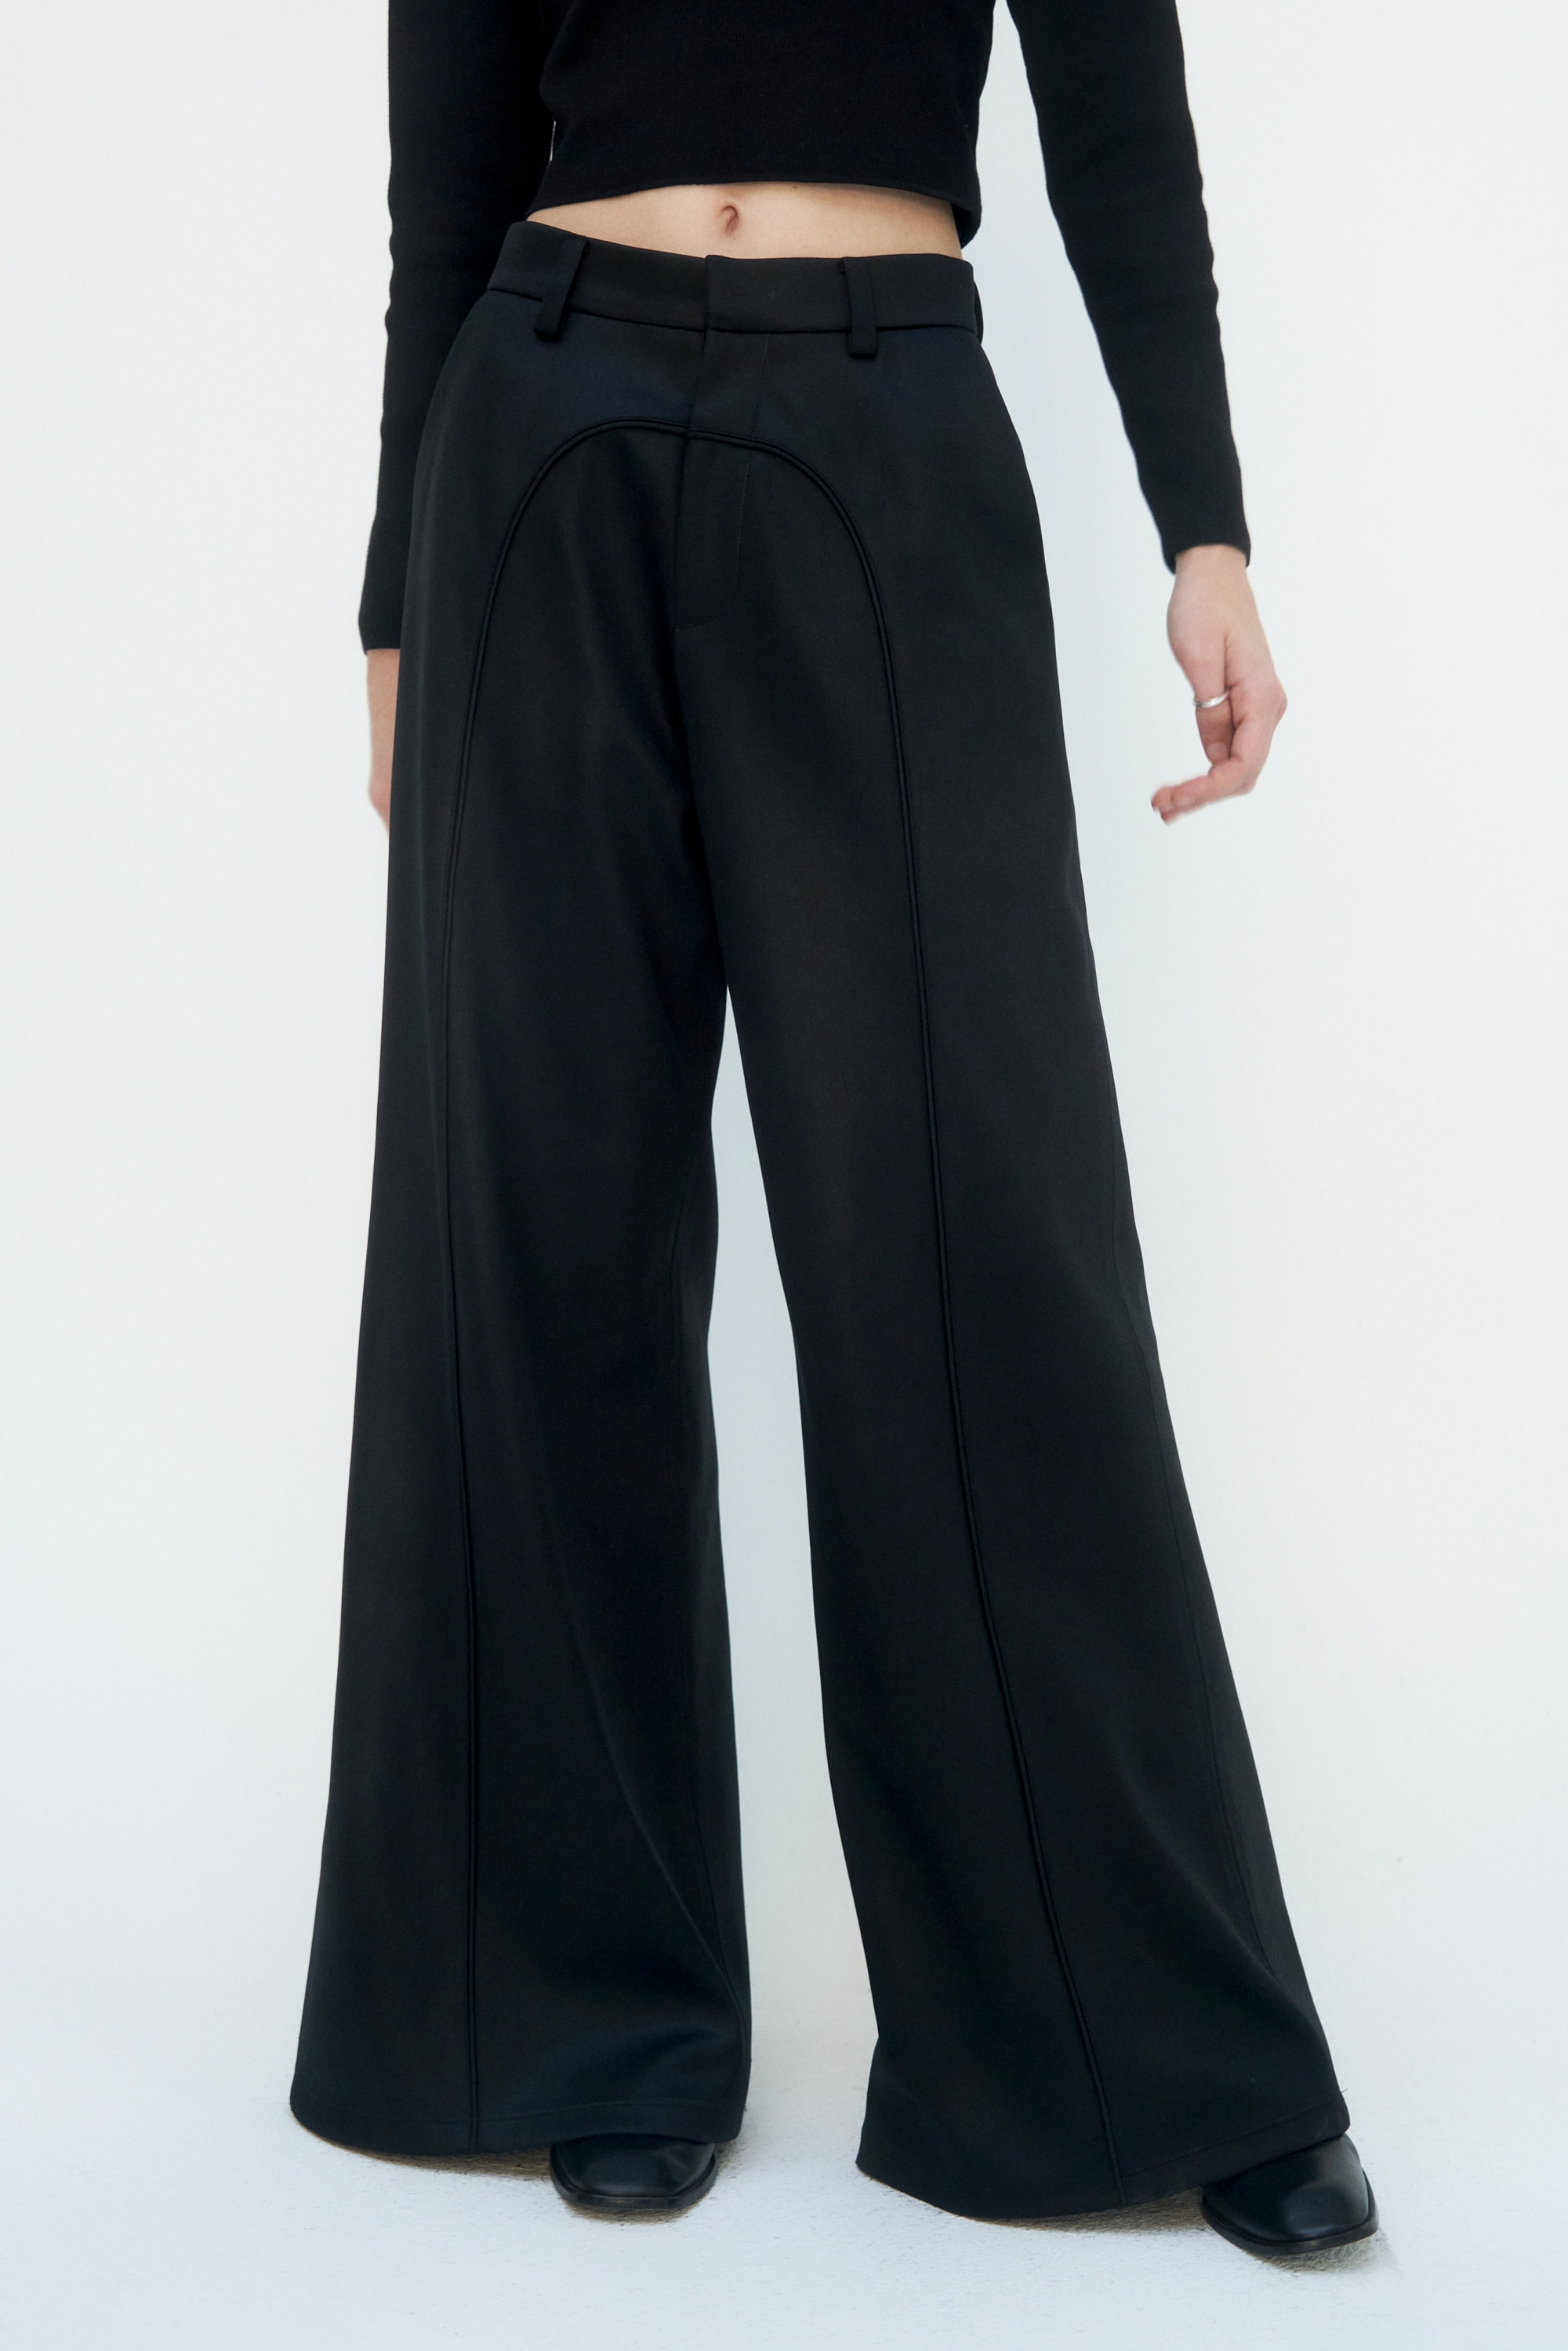 Suede Piping Classic Set-up Pants [ Black ]